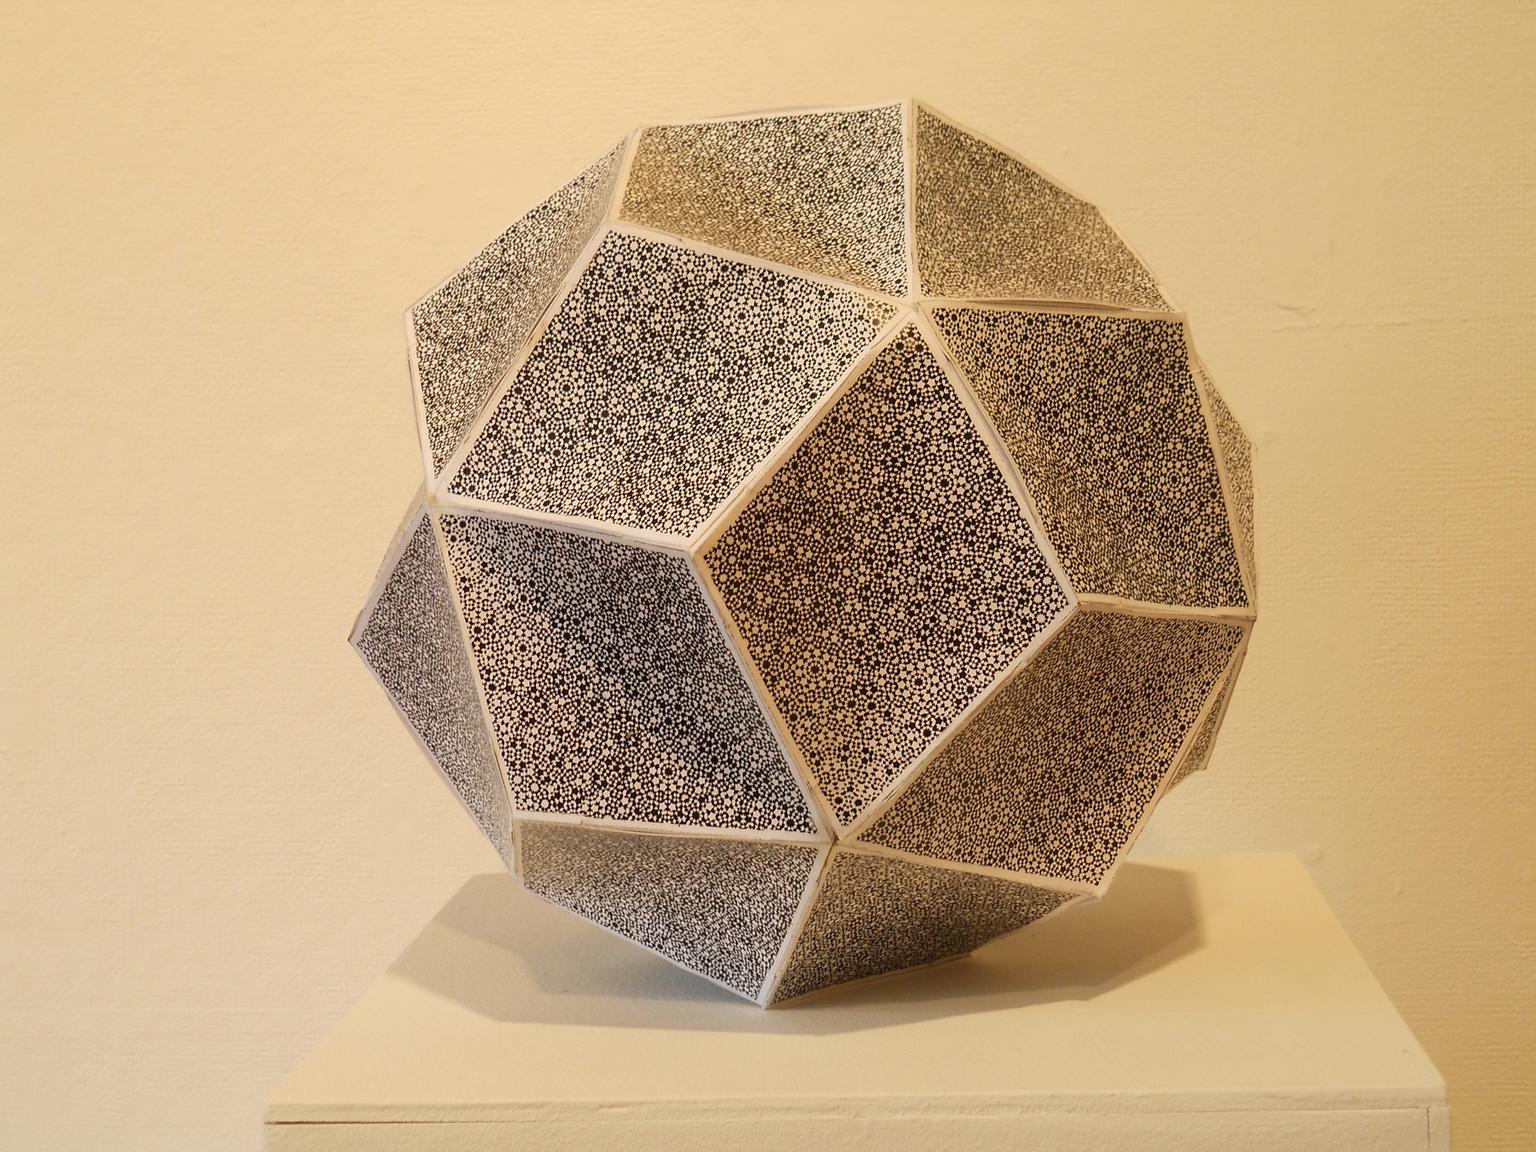 Image for entry 'Triacontahedron with star pattern'